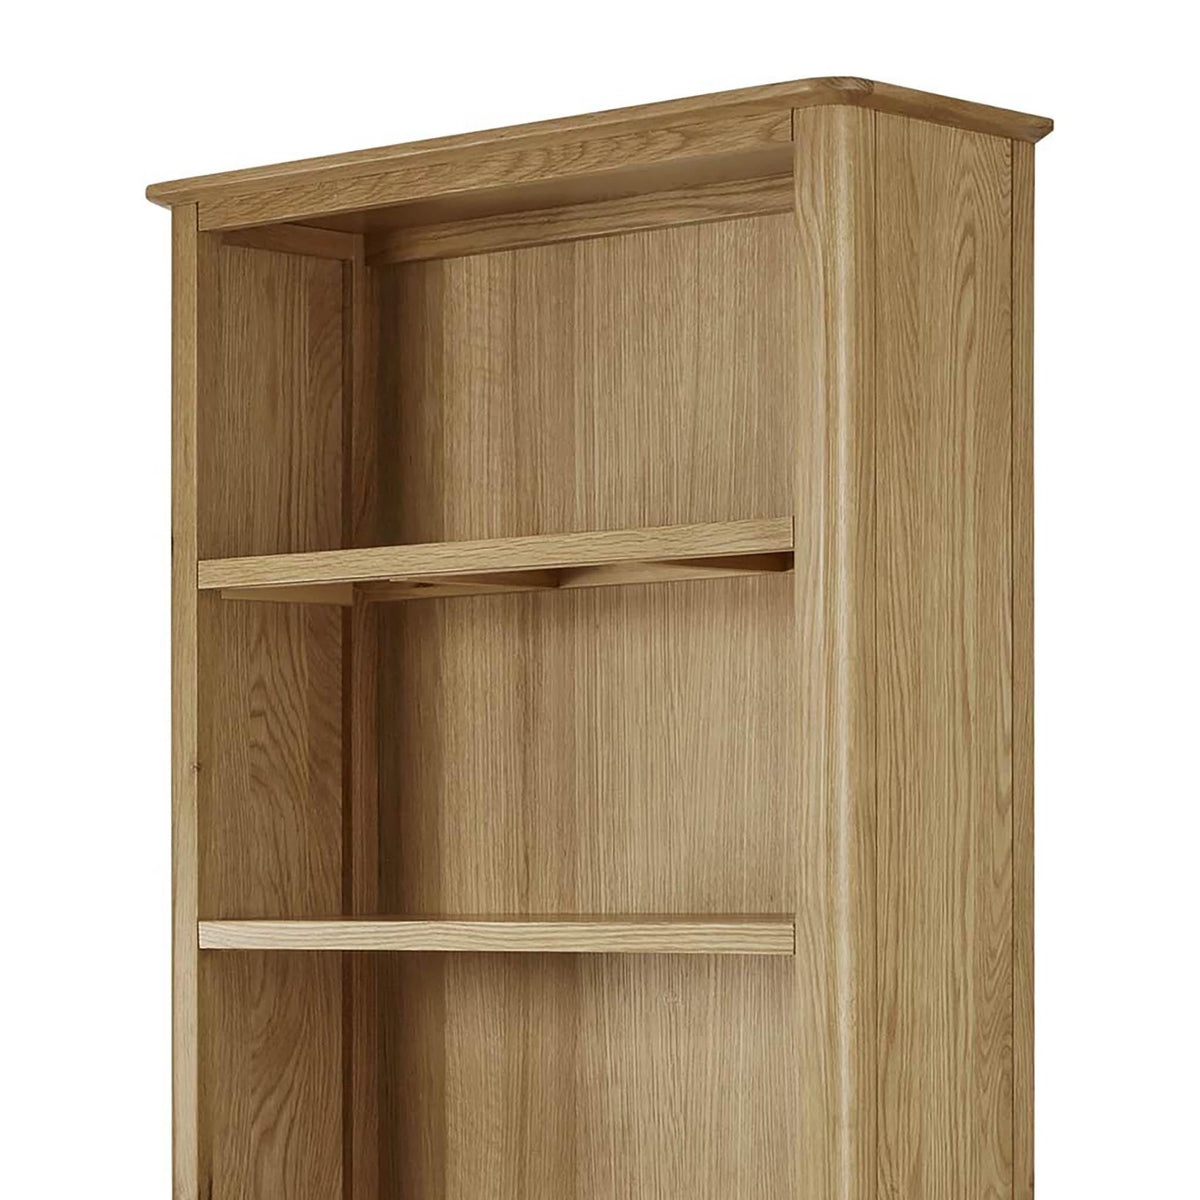 Alba Oak Large Bookcase - Close up of top of bookcase